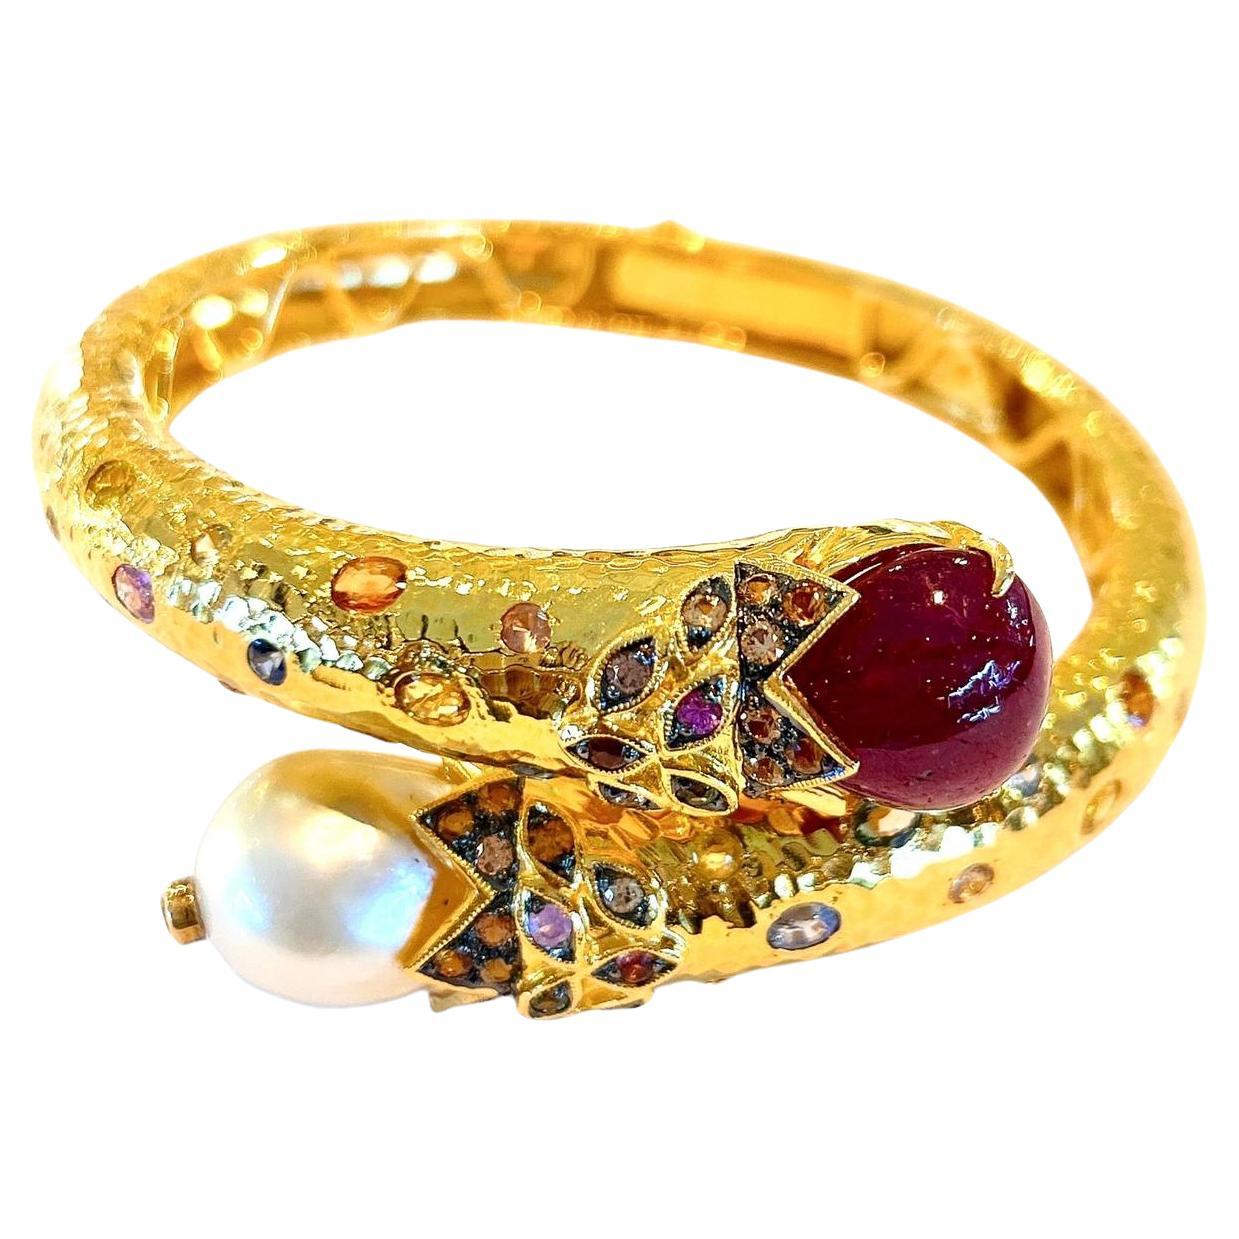 Bochic “Orient” Ruby, Fancy Sapphire and South Sea Bangle Set in 22k Gold